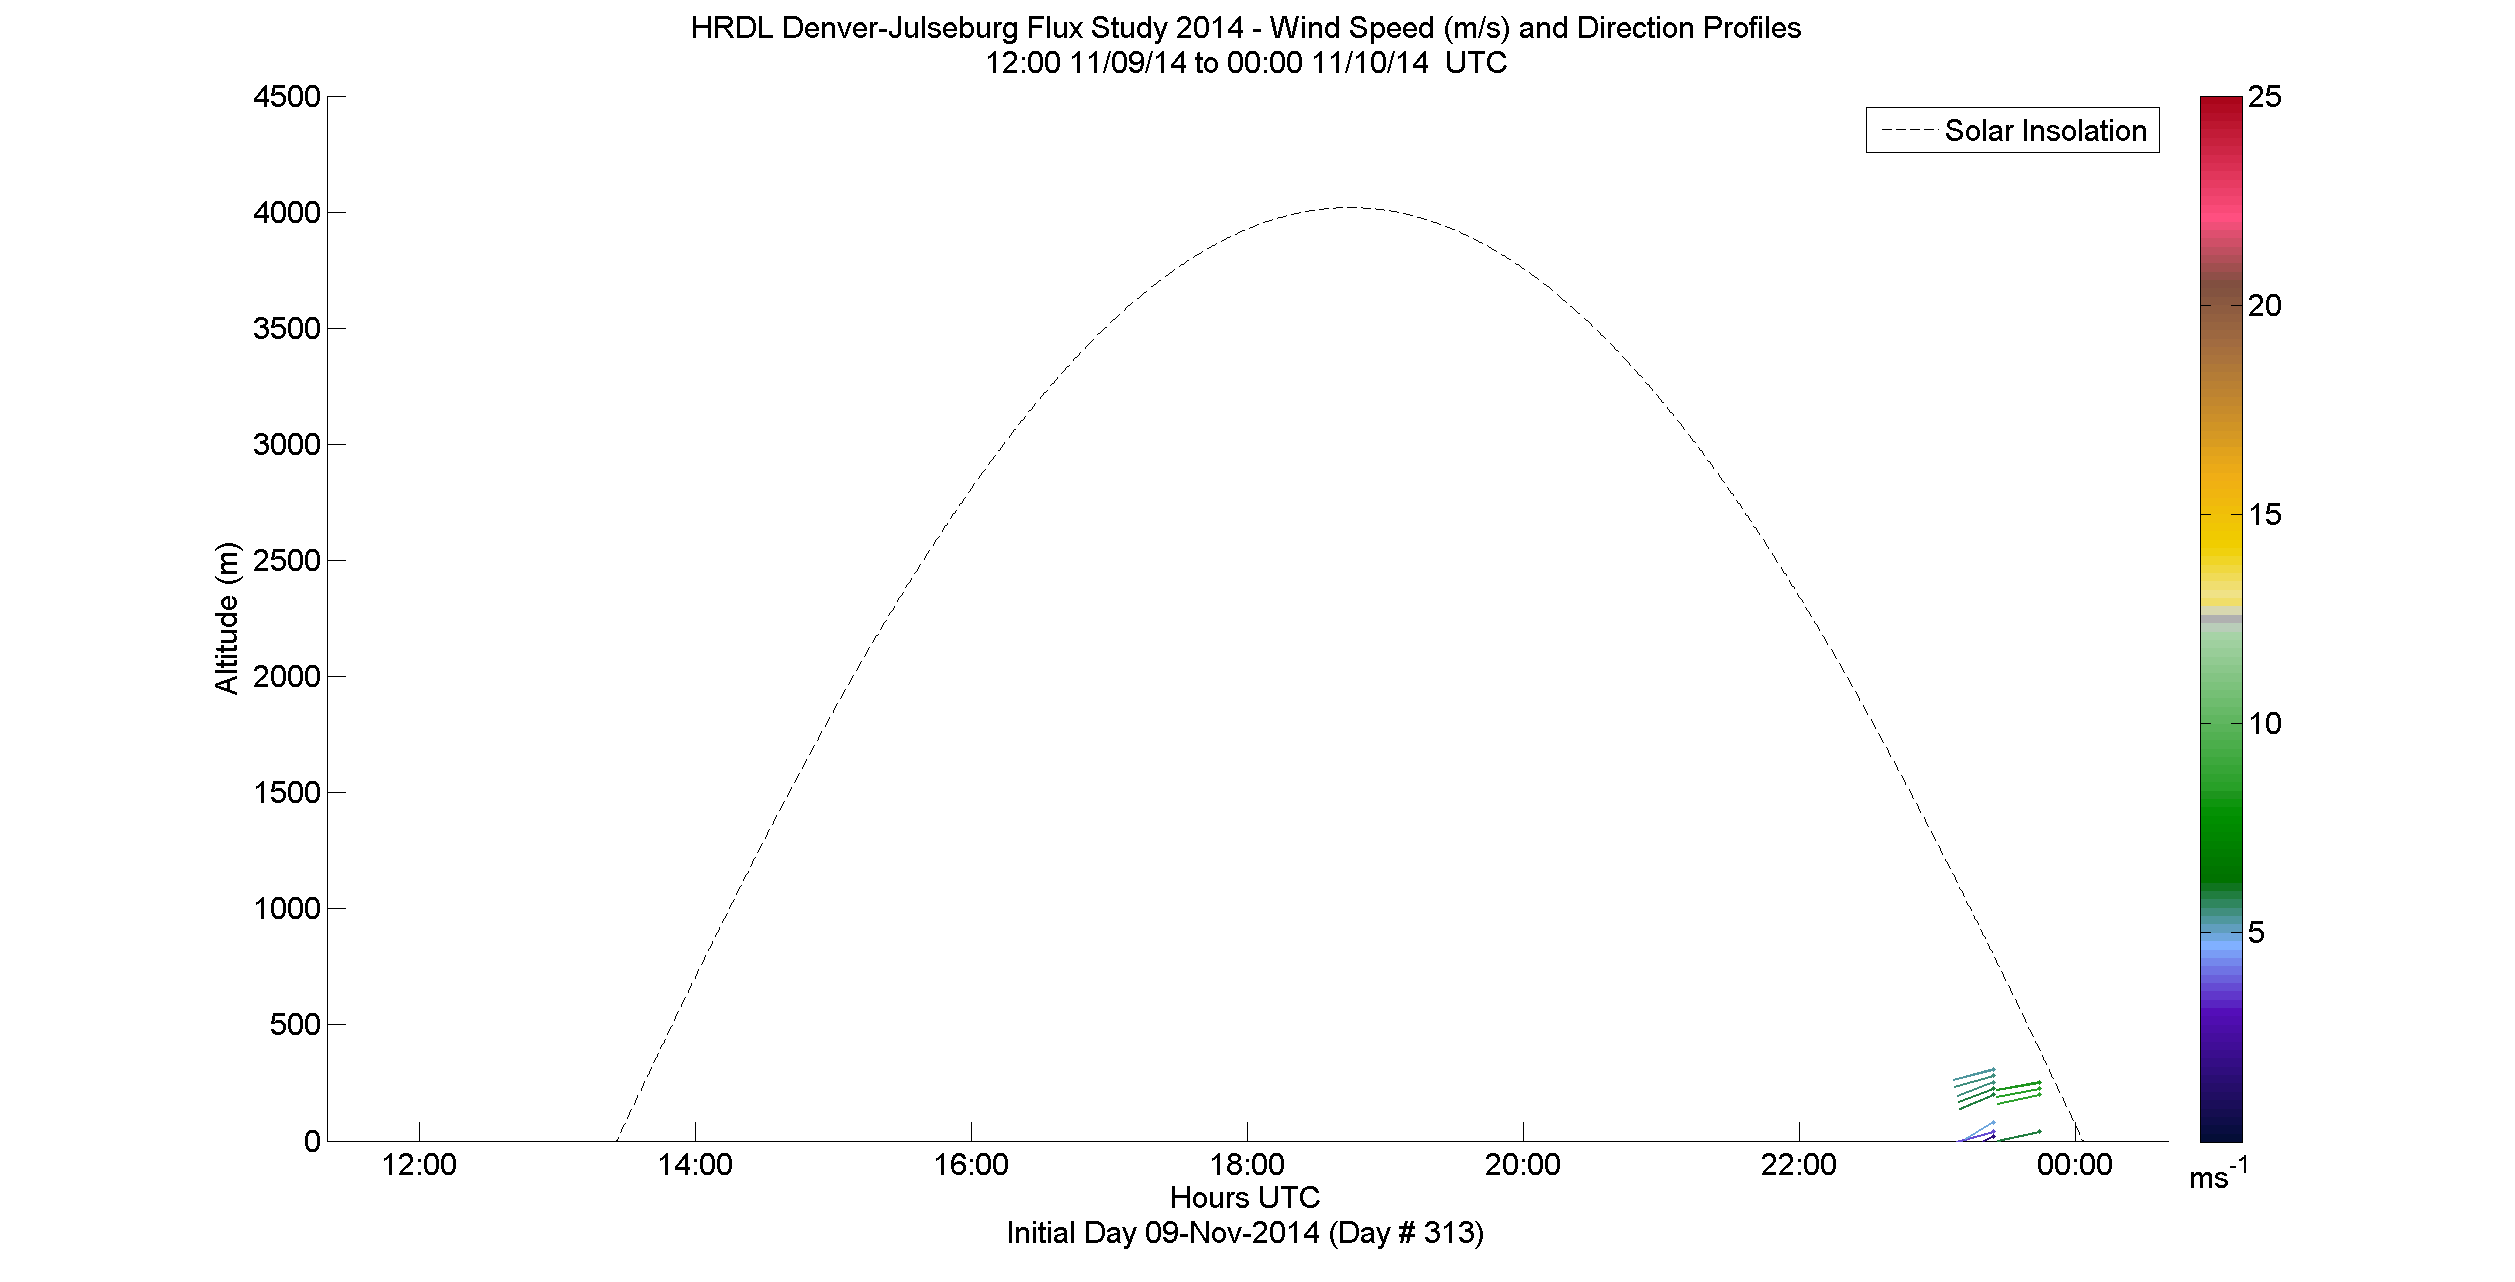 HRDL speed and direction profile - November 9 pm